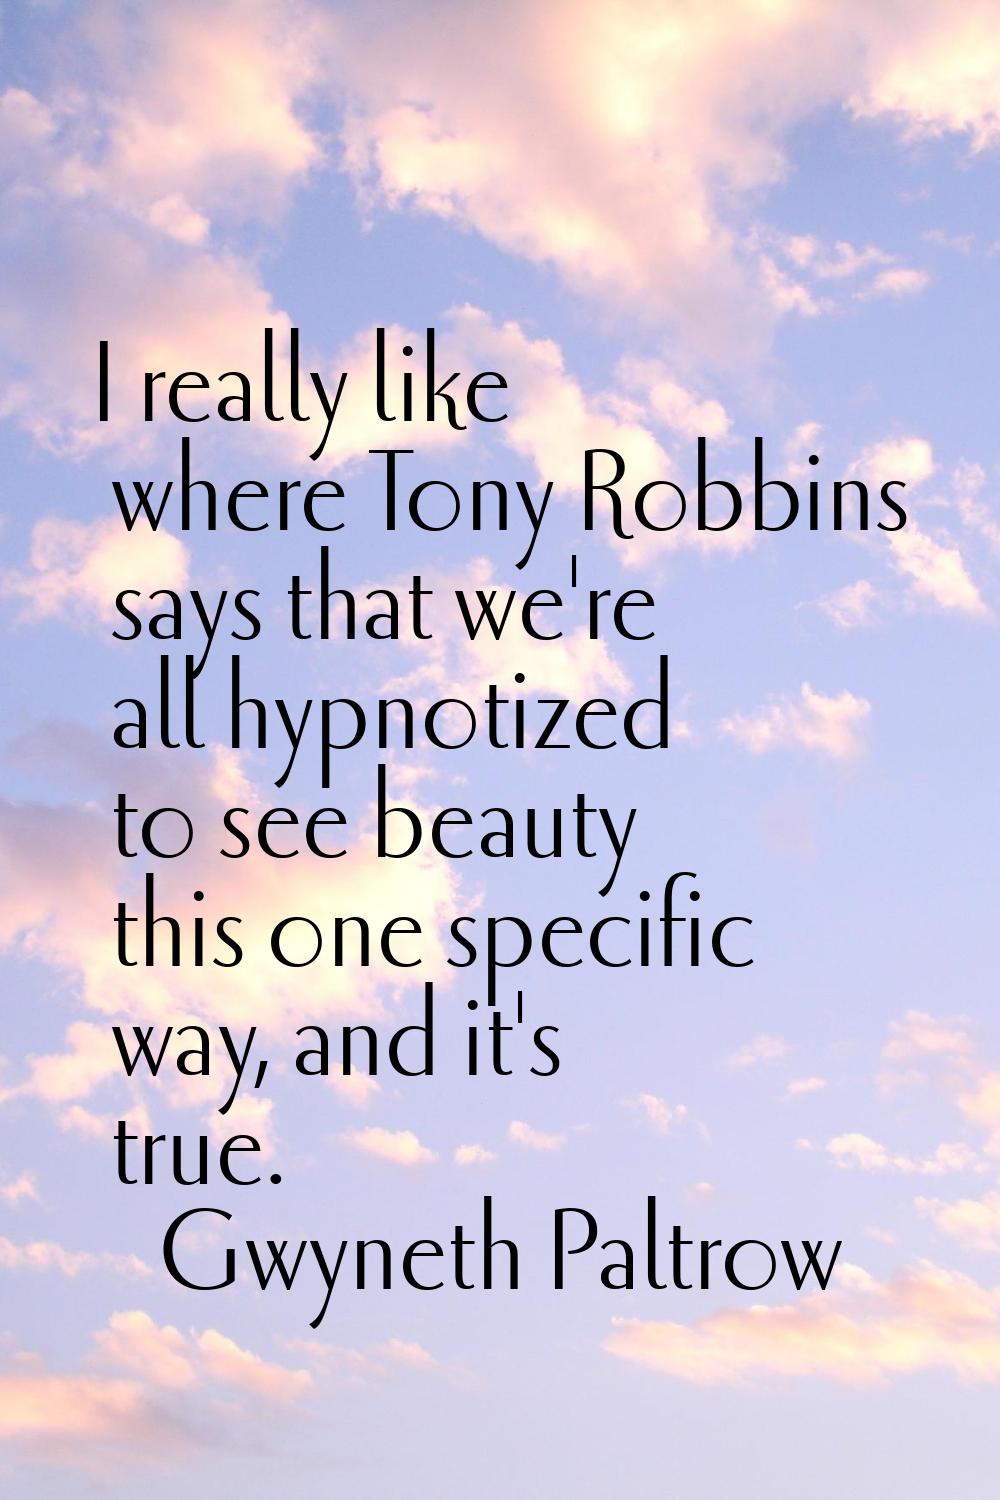 I really like where Tony Robbins says that we're all hypnotized to see beauty this one specific way